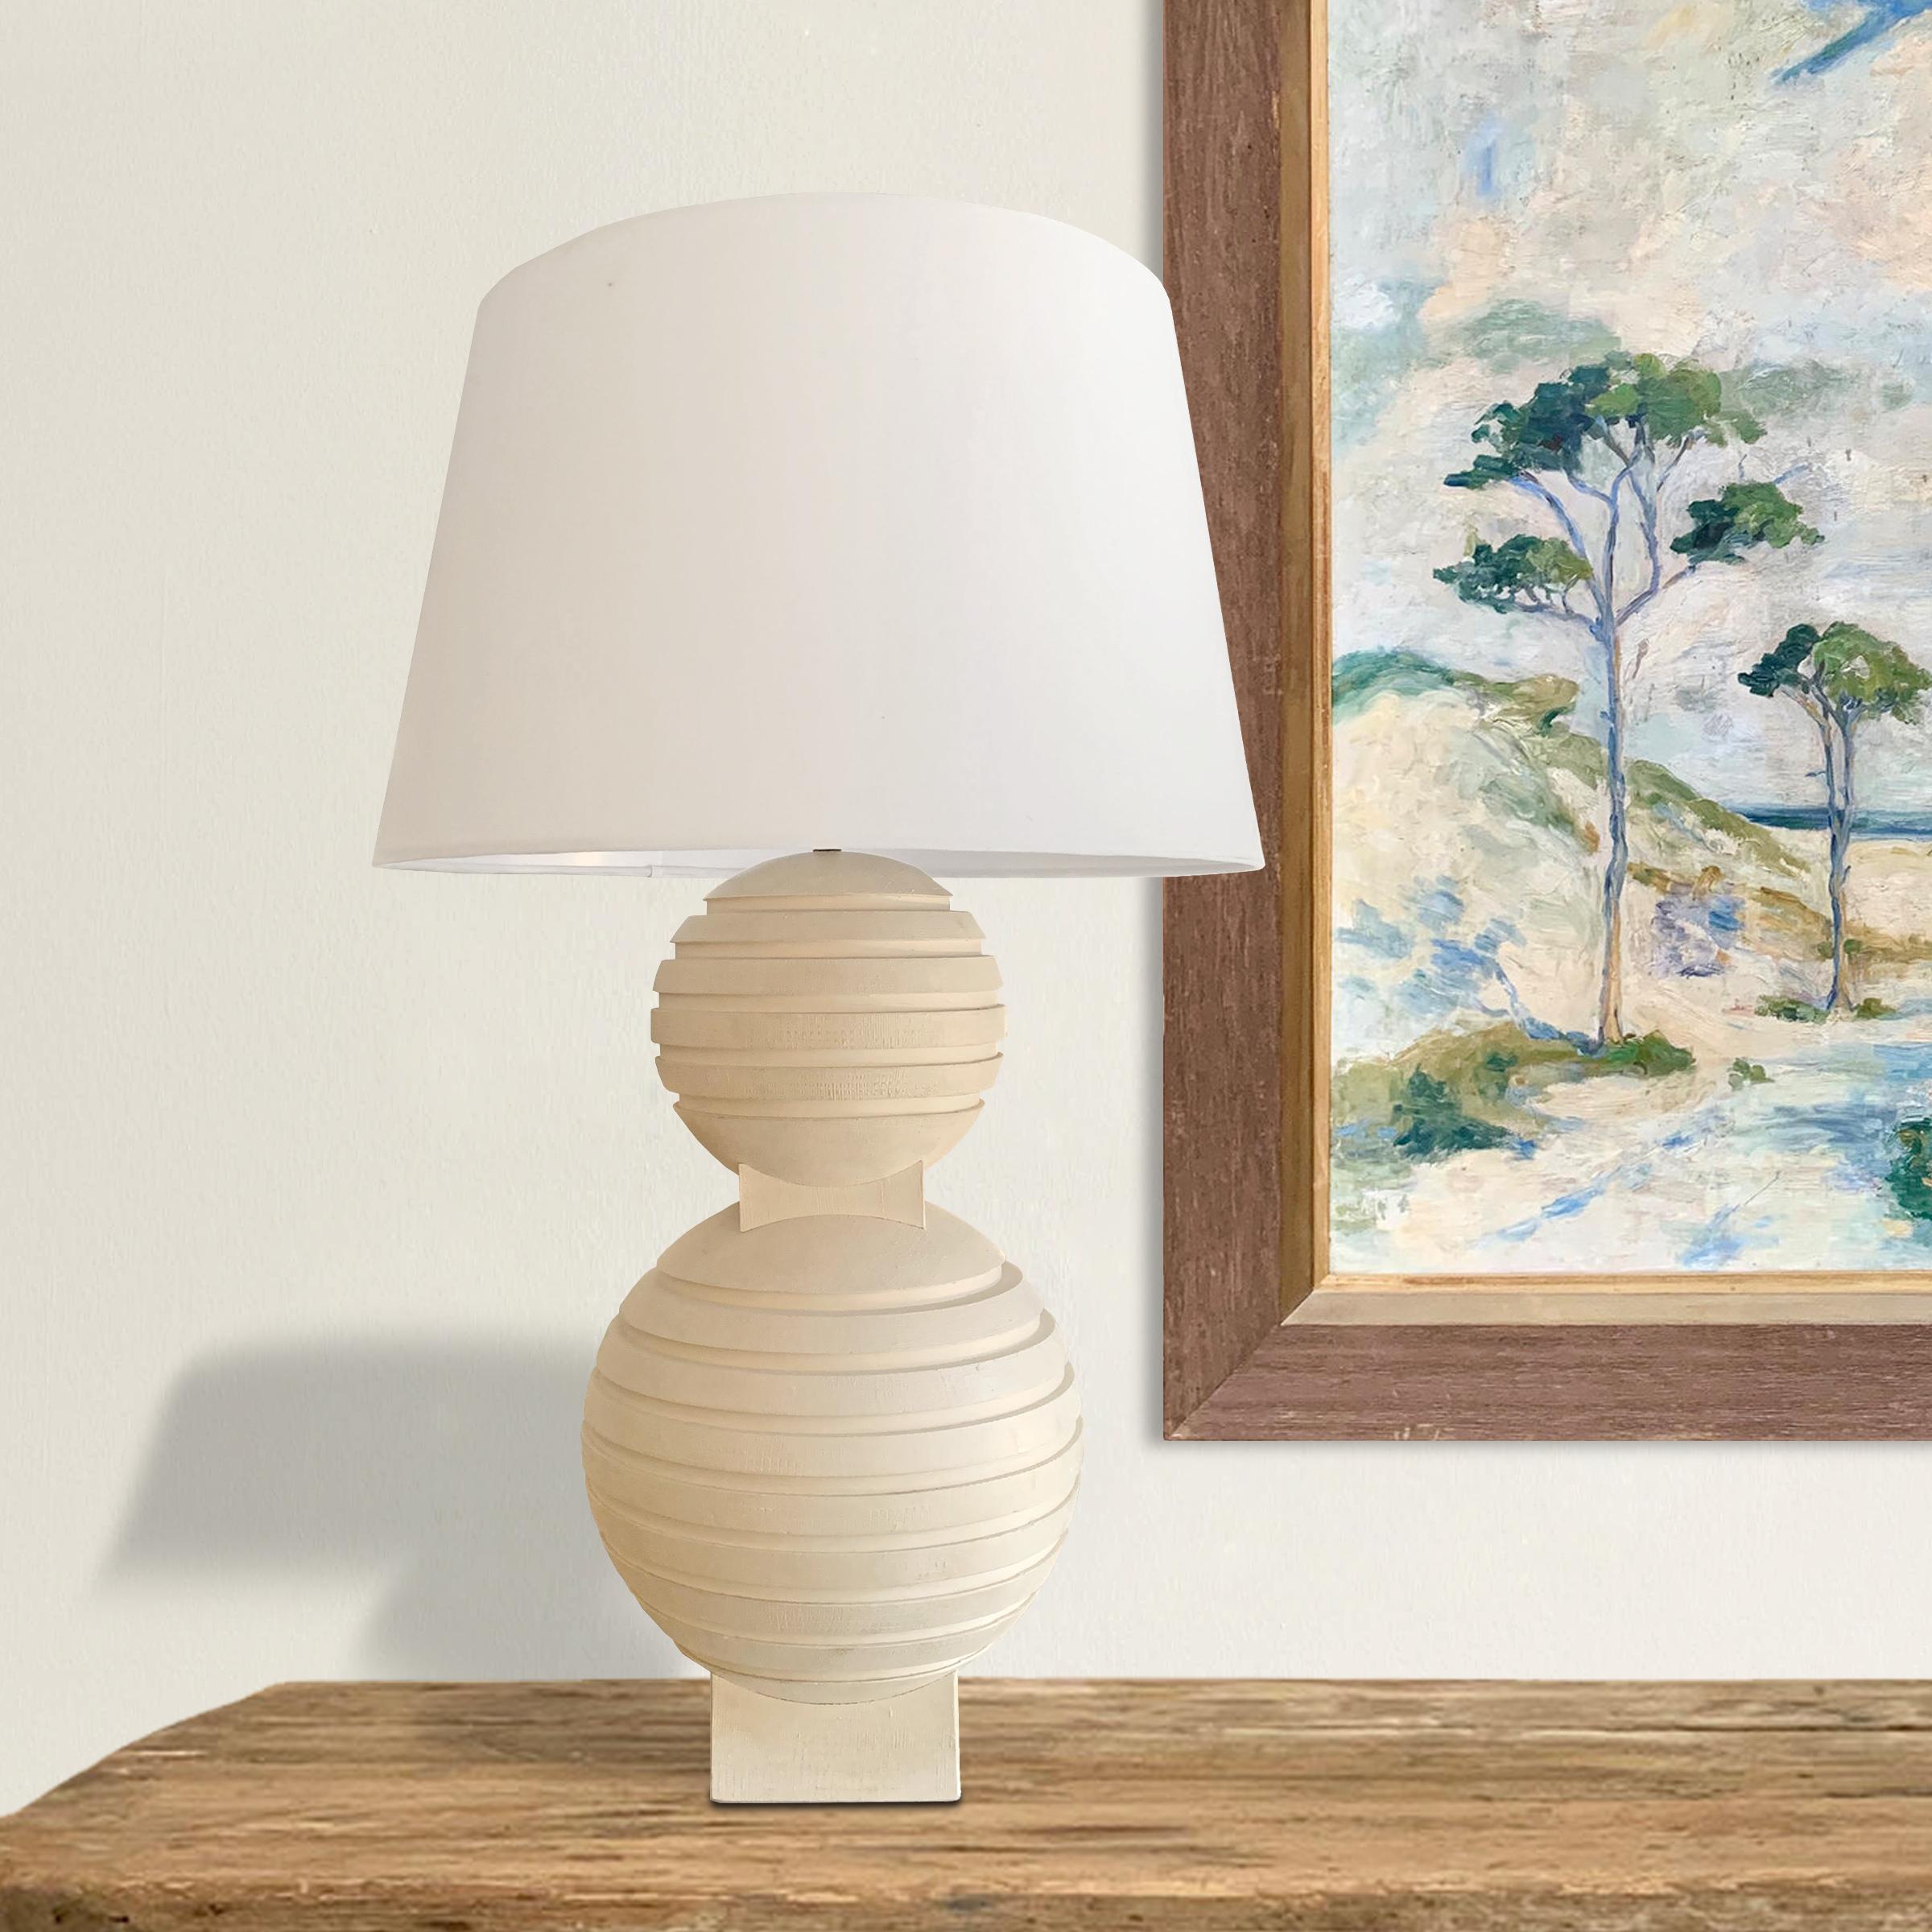 A fantastic large-scale plaster table lamp with a wonderfully sculptural form with two spheres with incised lines and a hand-applied textural finish. Wired for the US with a linen shade.